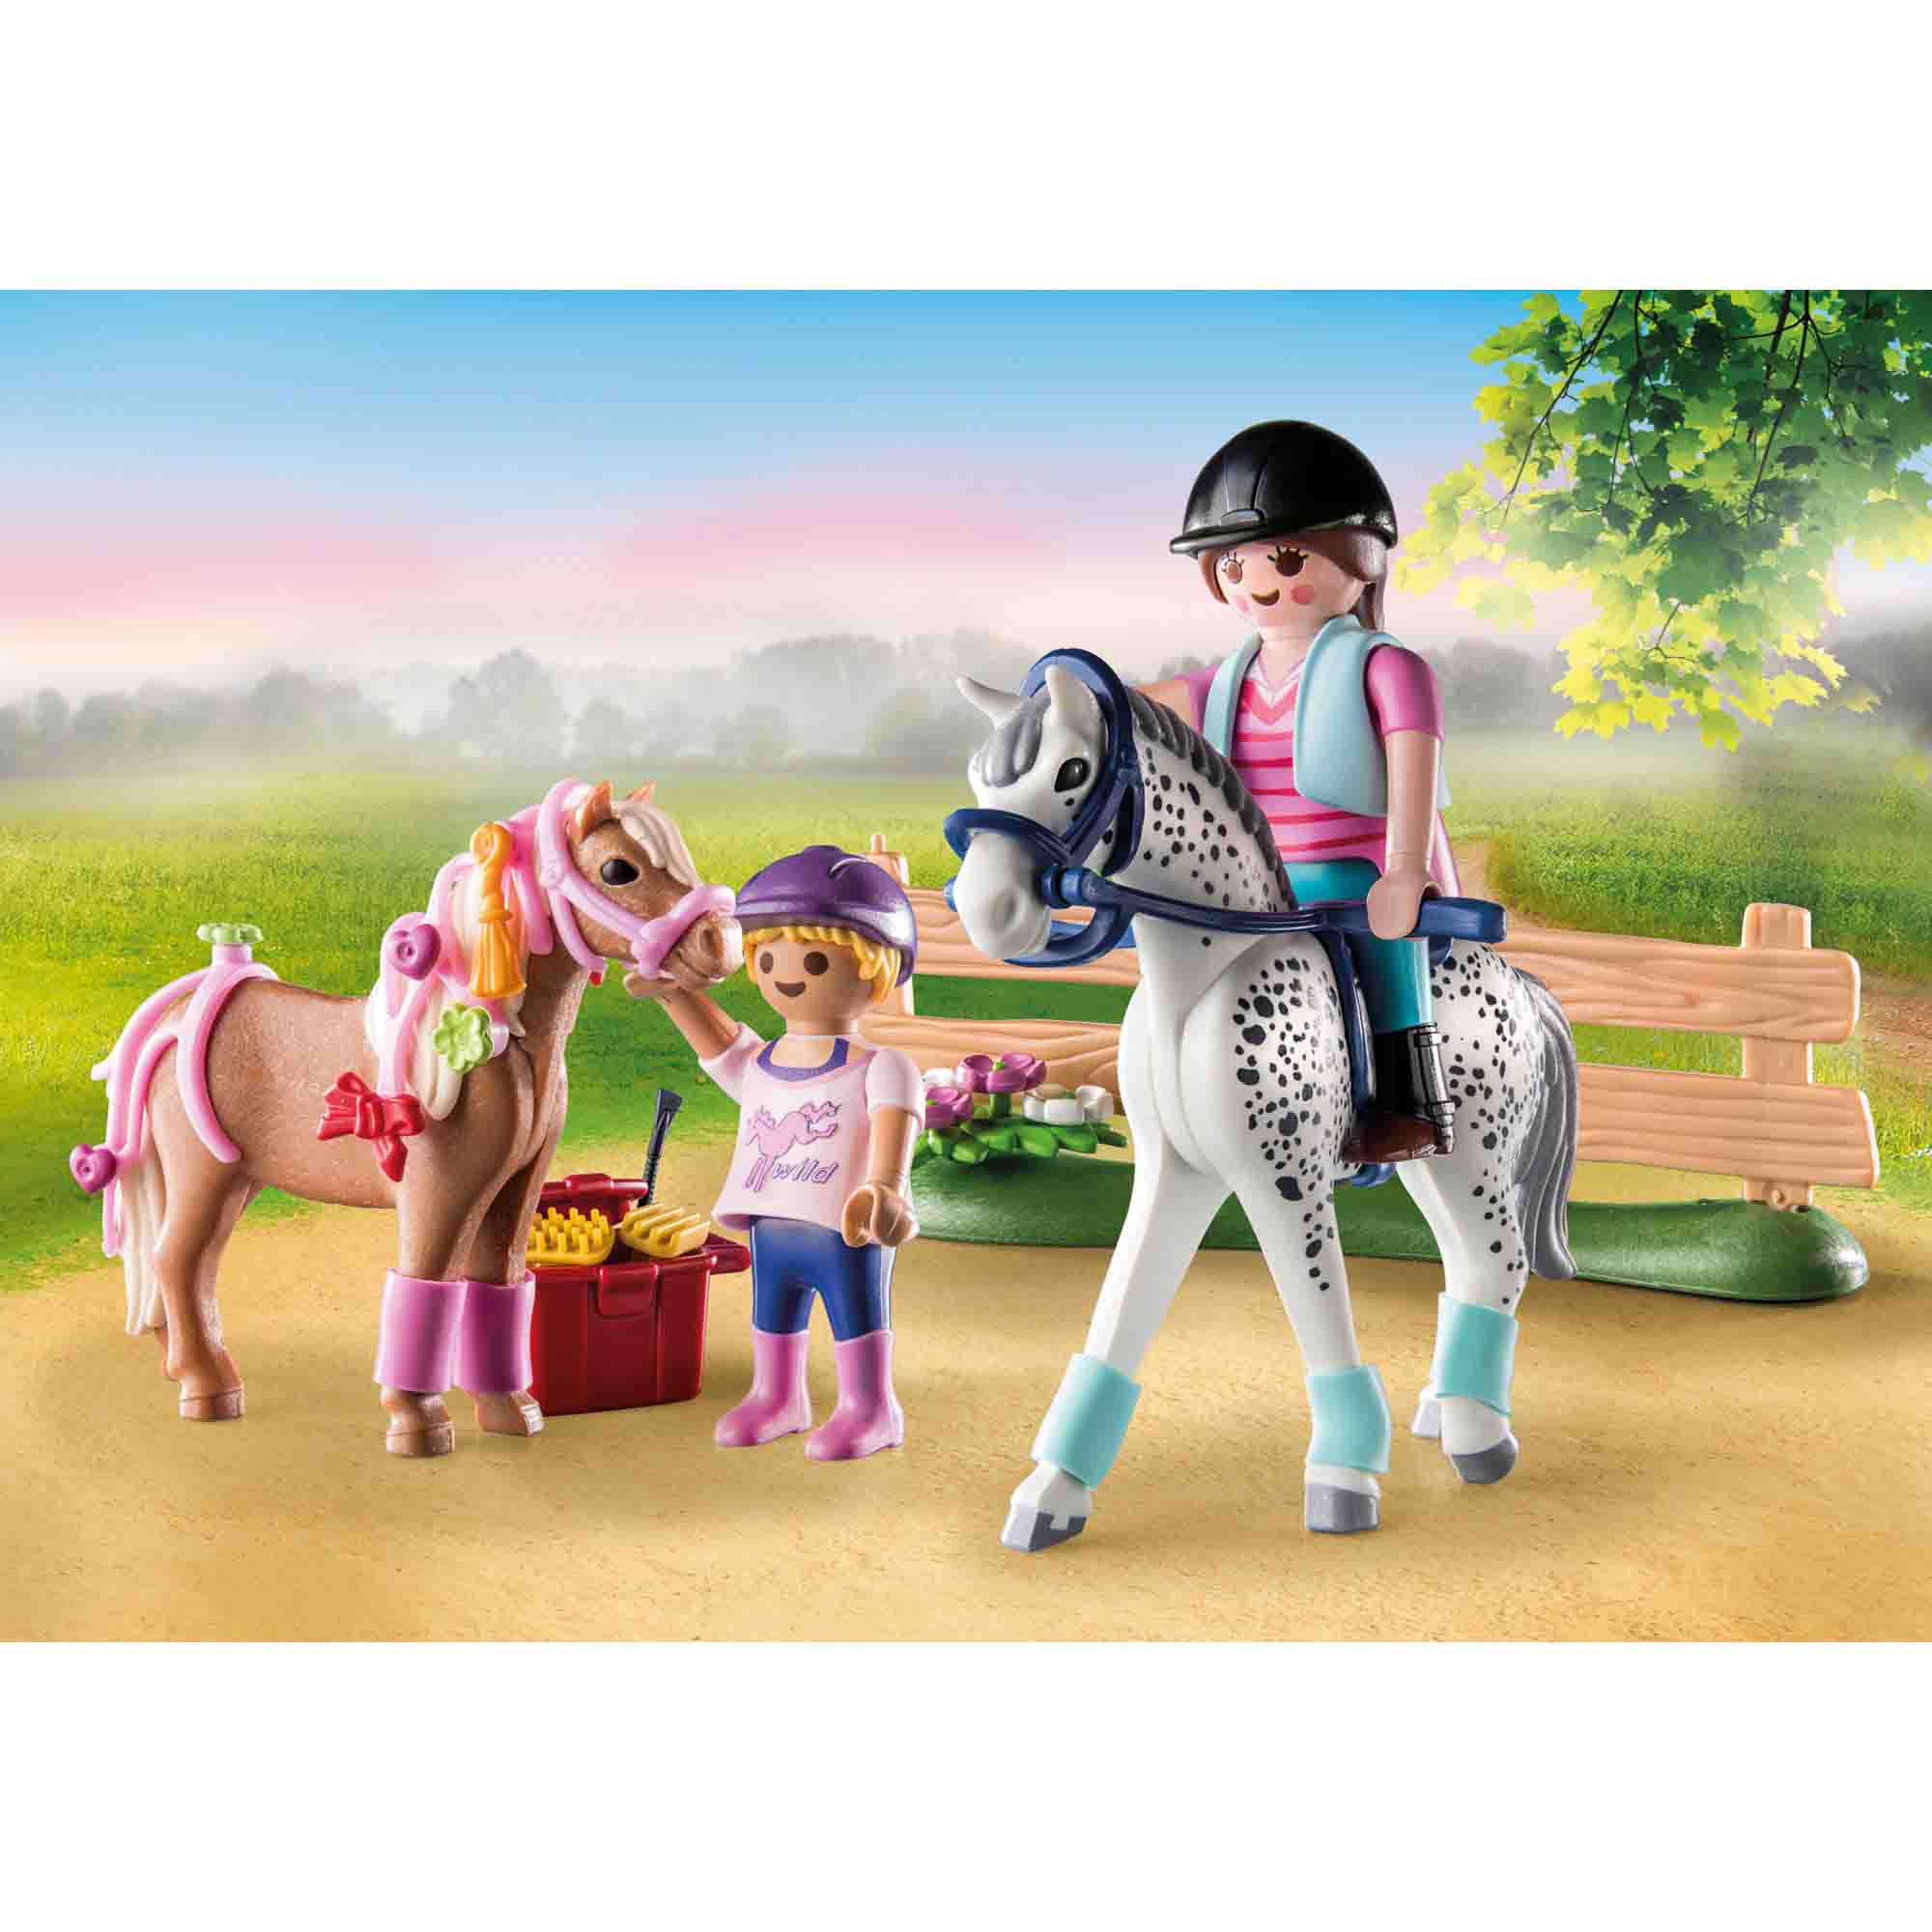 Jucarii Playmobil Country